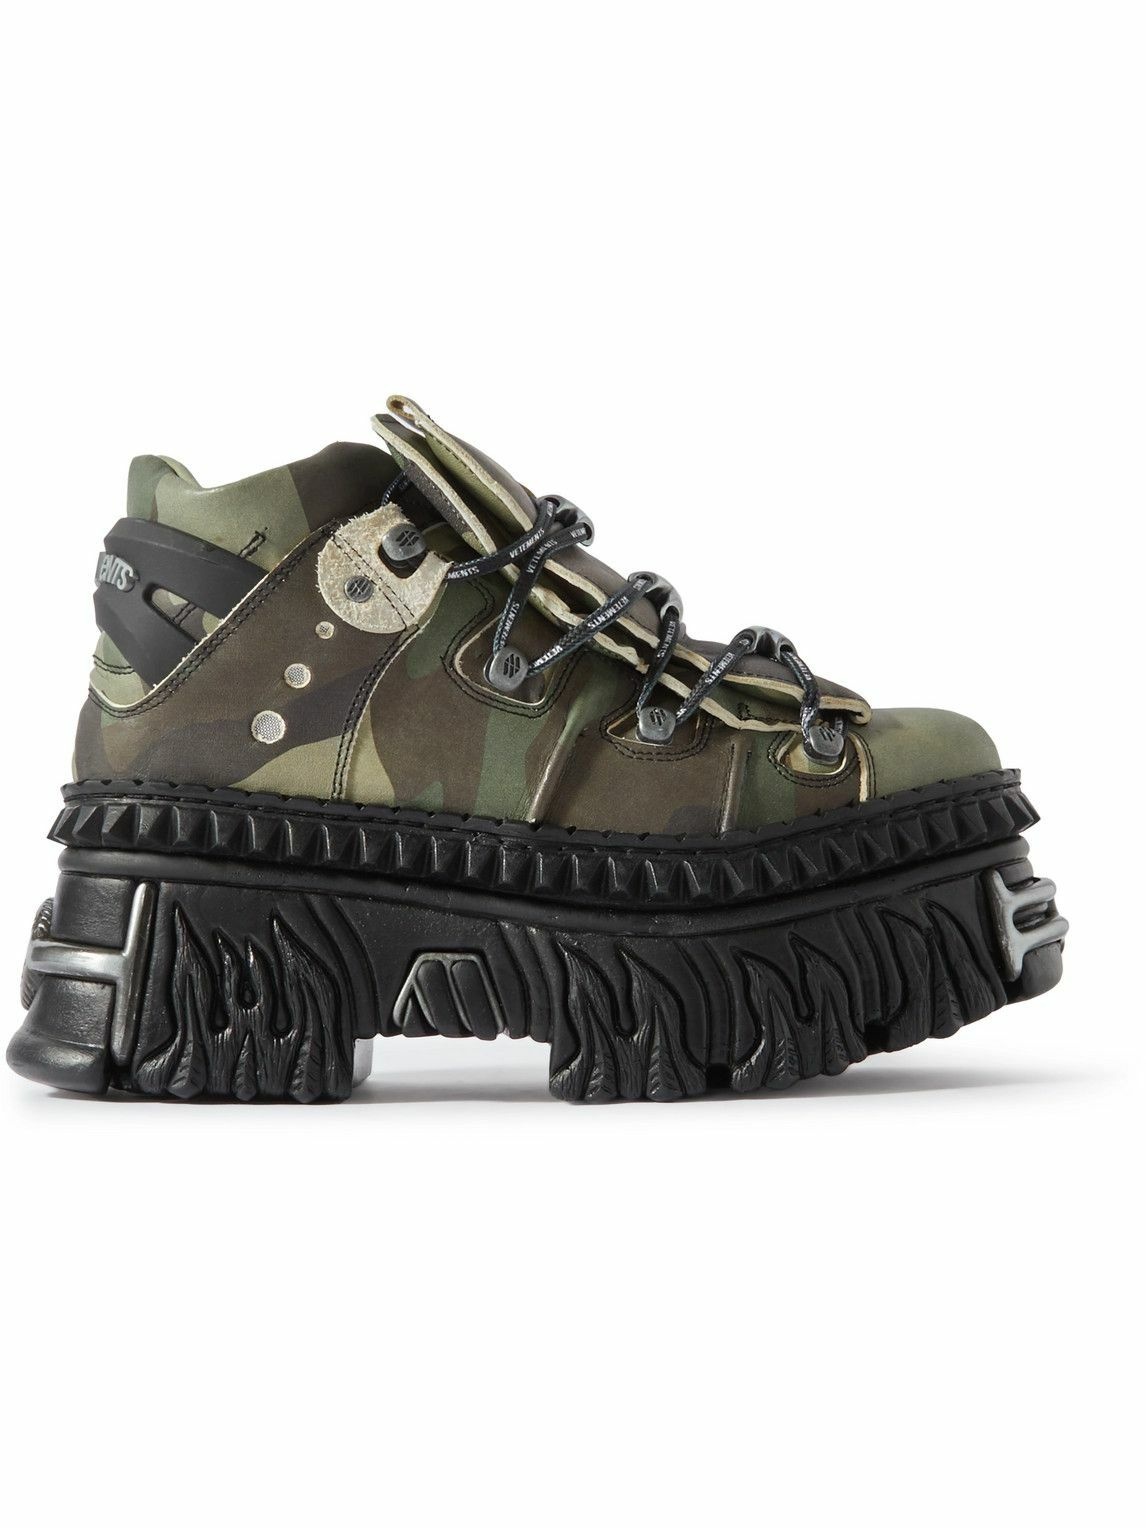 Photo: VETEMENTS - New Rock Embellished Camouflage-Print Leather Platform Sneakers - Green